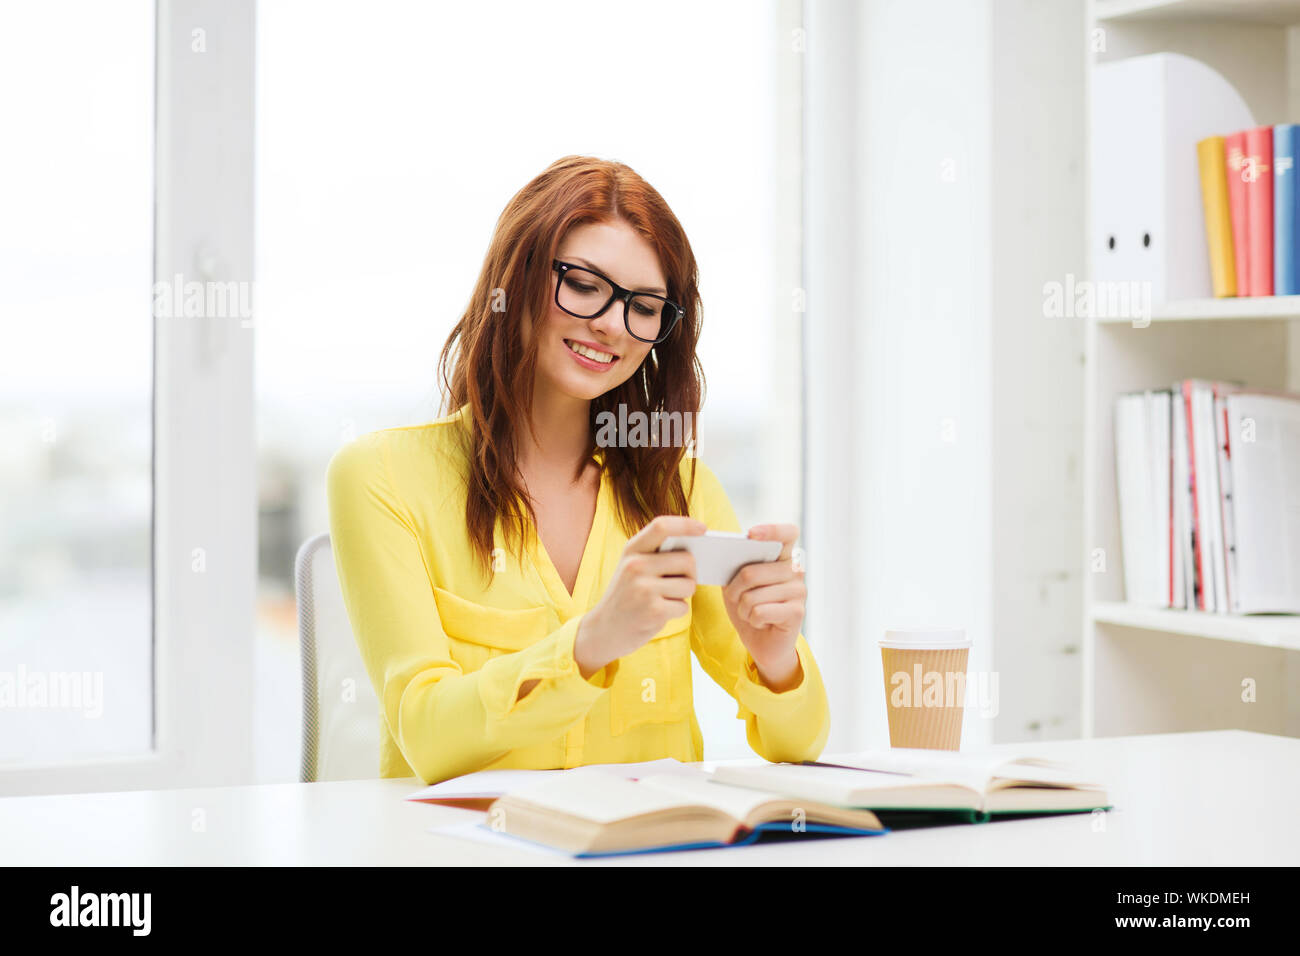 education, entretainment and technology concept - smiling student girl in eyeglasses with smartphone, books and takeaway coffee at school Stock Photo